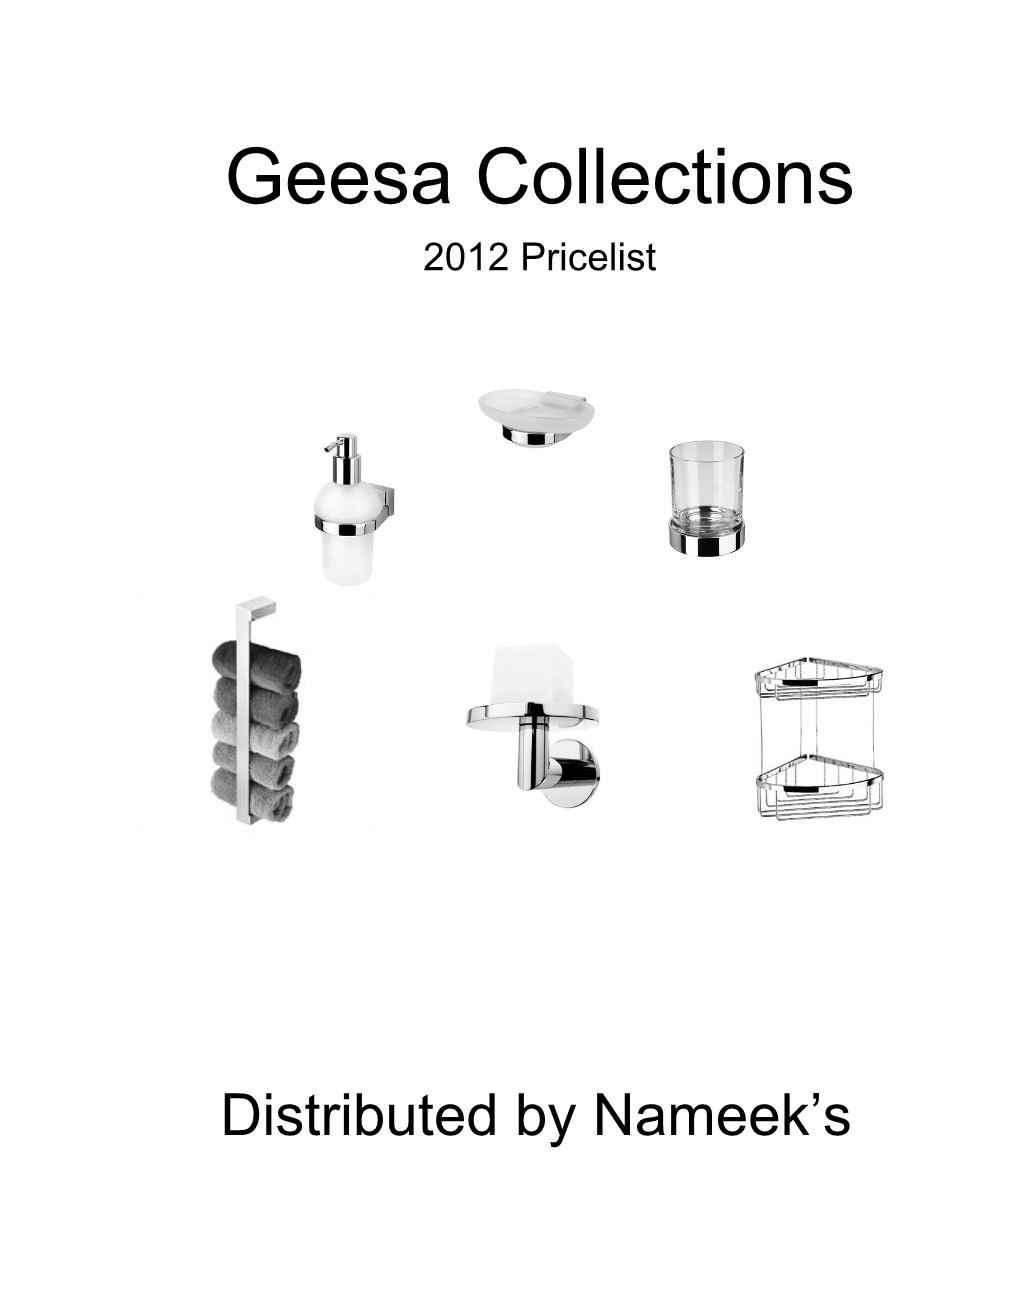 Geesa Collections 2012 Pricelist